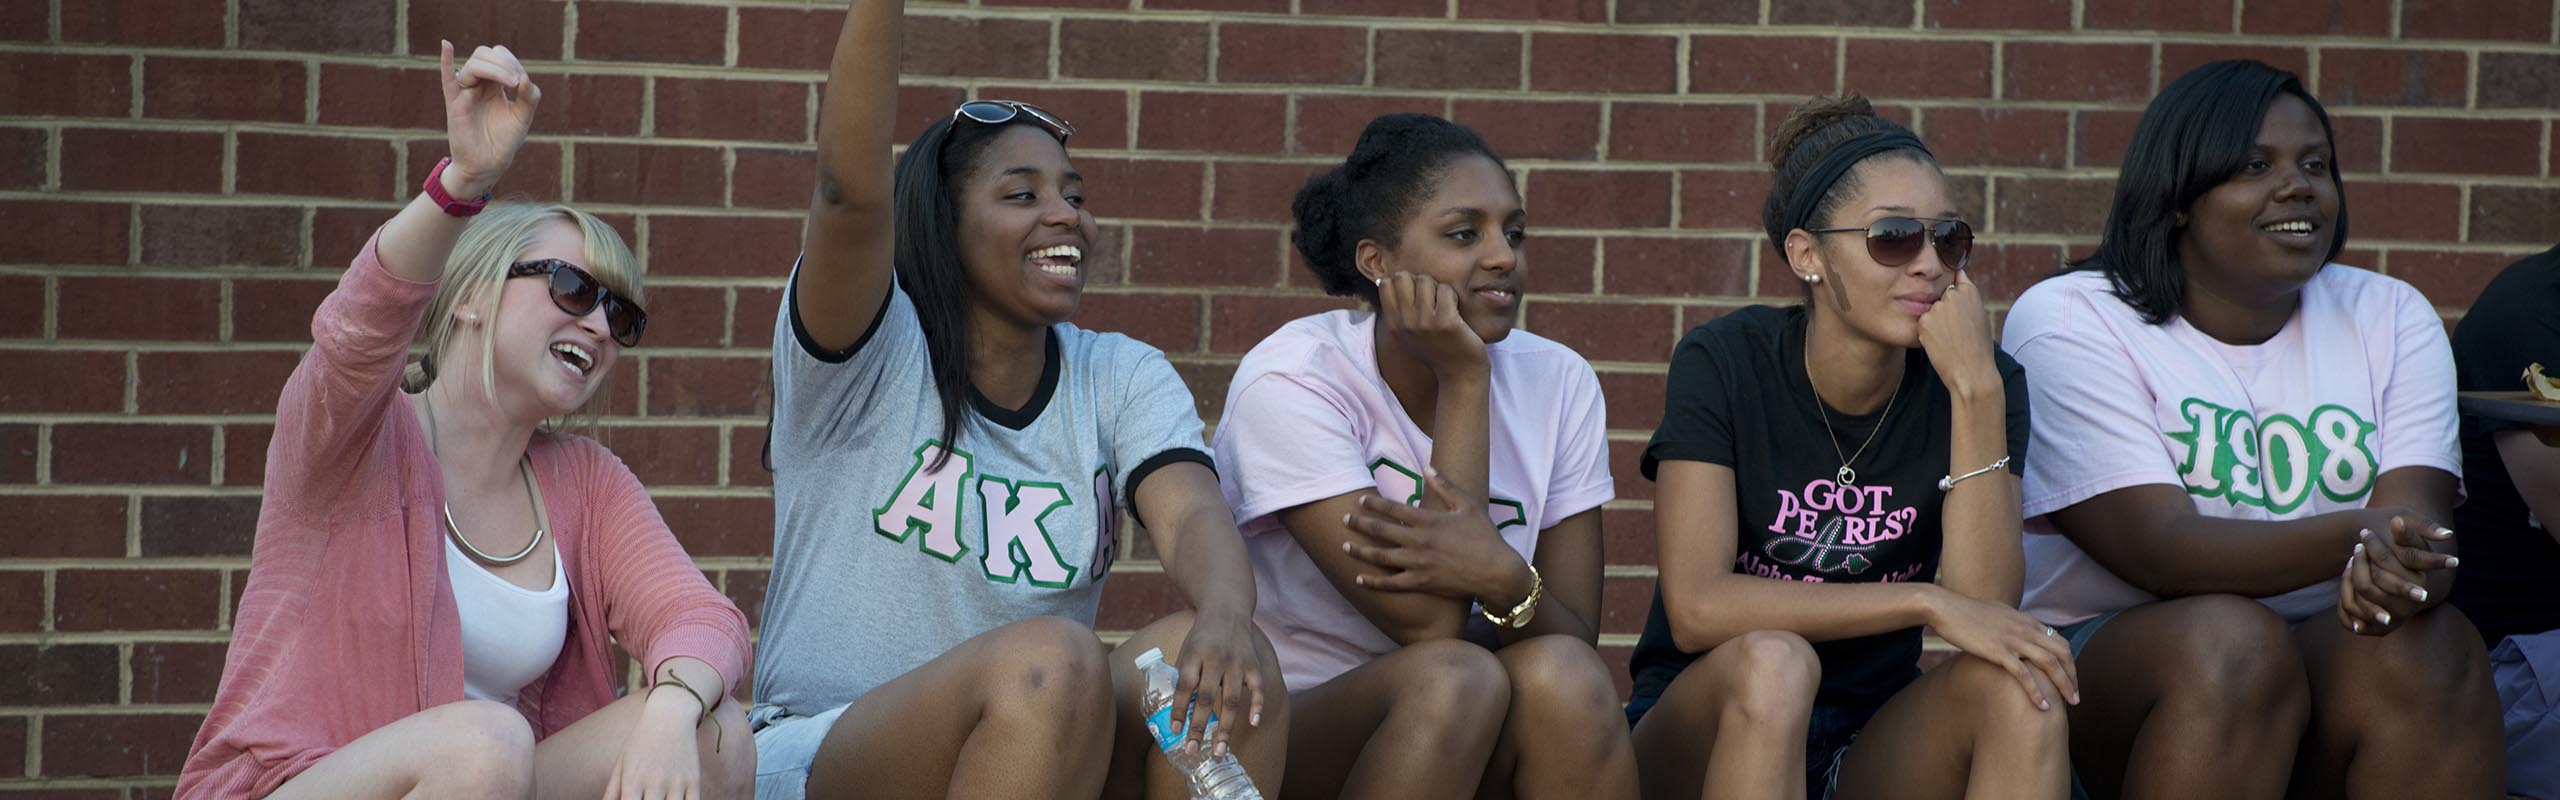 Ciera Martinez '15 attends the National Pan-Hellenic Council end-of-year Yard Show at Lakeside Plaza with her sorority, Alpha Kappa Alpha.